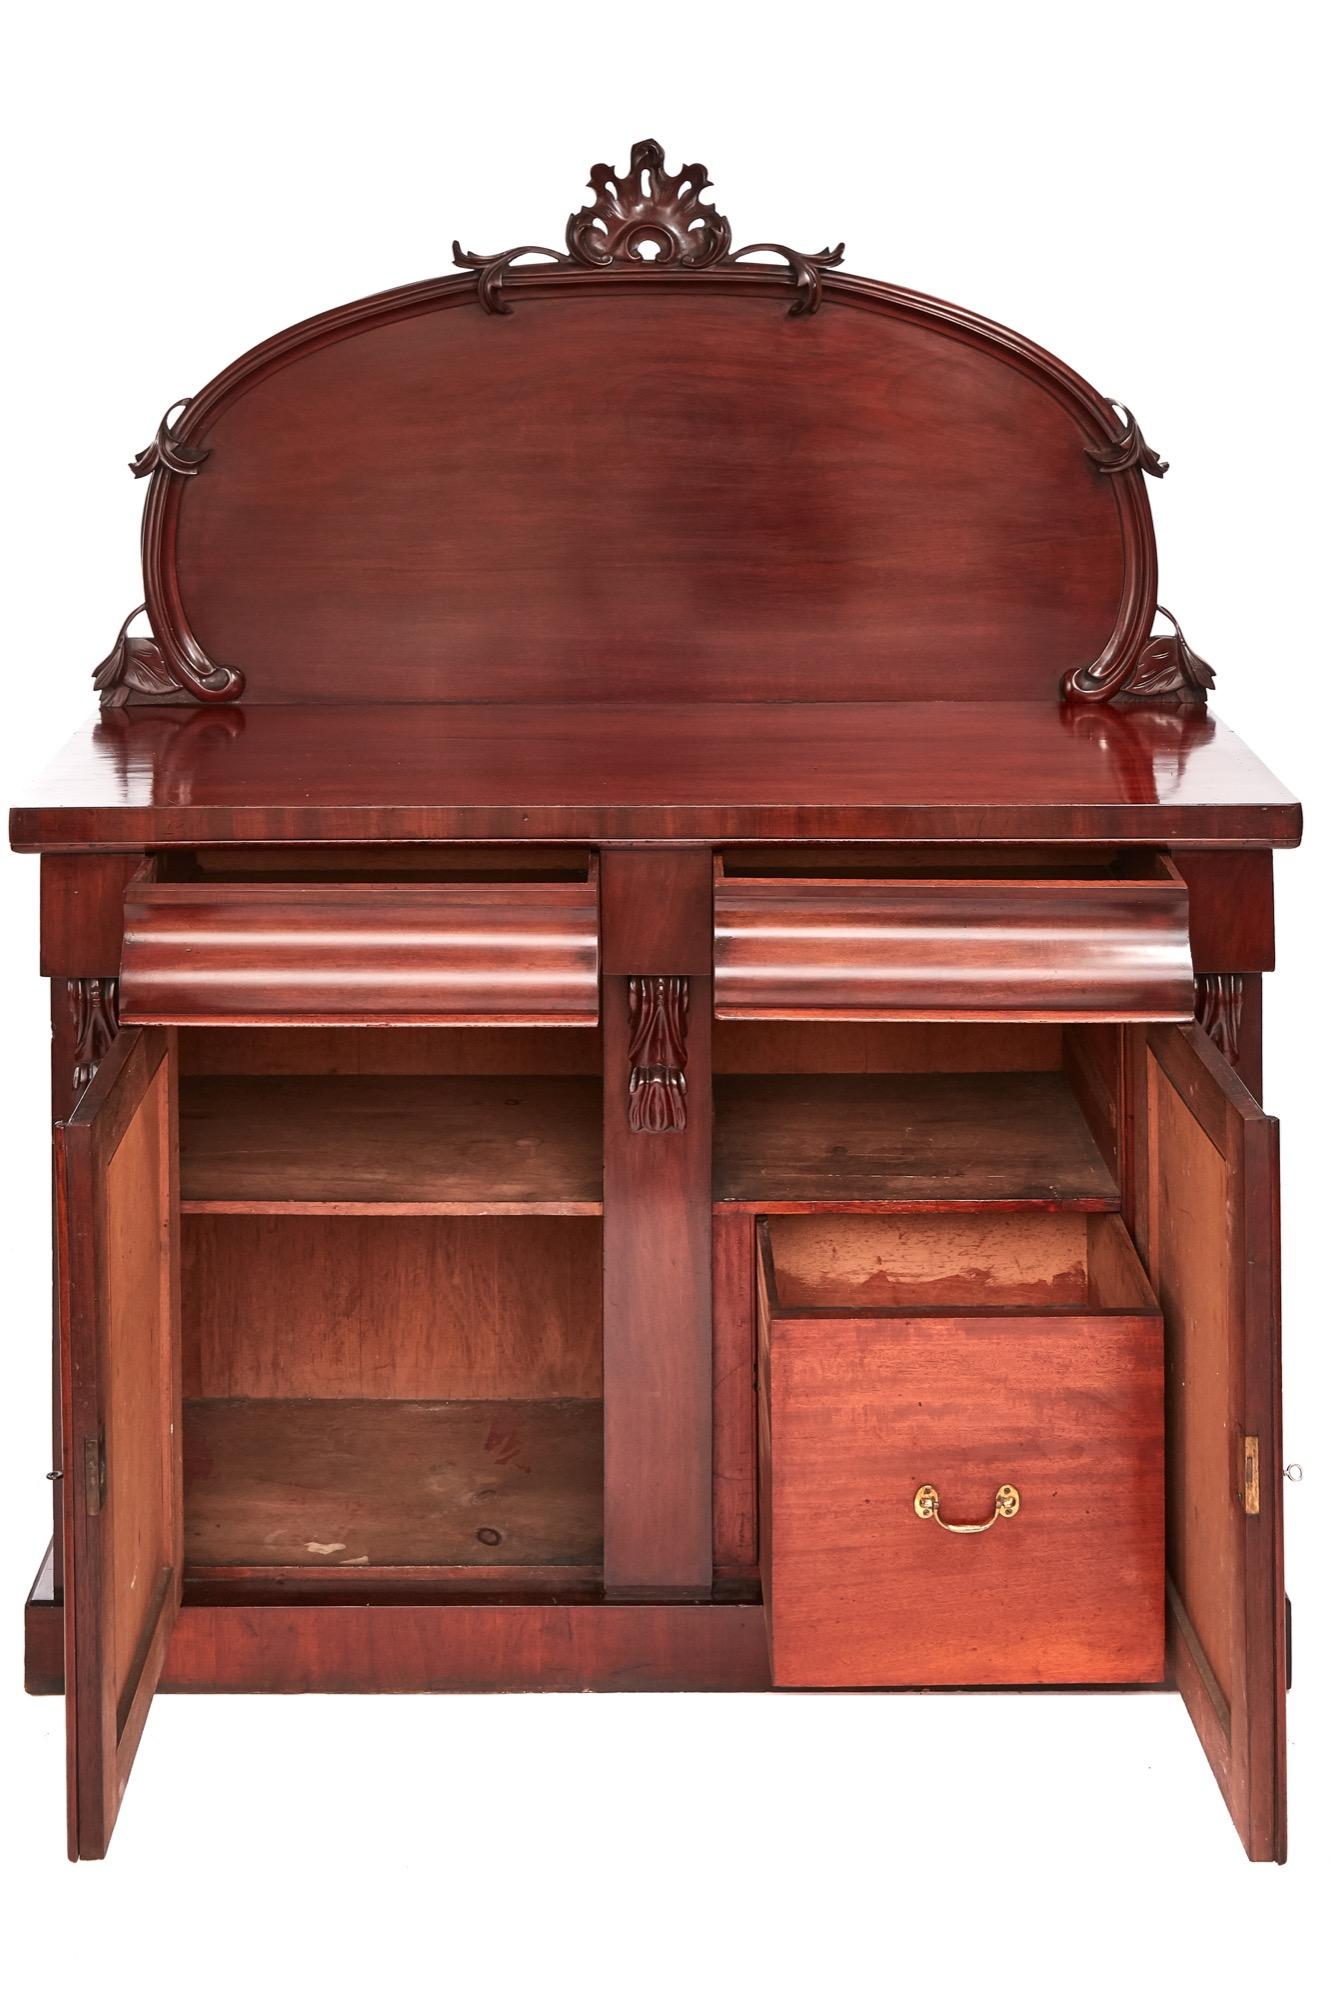 Quality Victorian mahogany Chiffonier with a charming carved rounded back, the base having two frieze drawers, two mahogany paneled doors with elegant carvings each side, fully fitted interior, standing on a plinth base.

This is in splendid